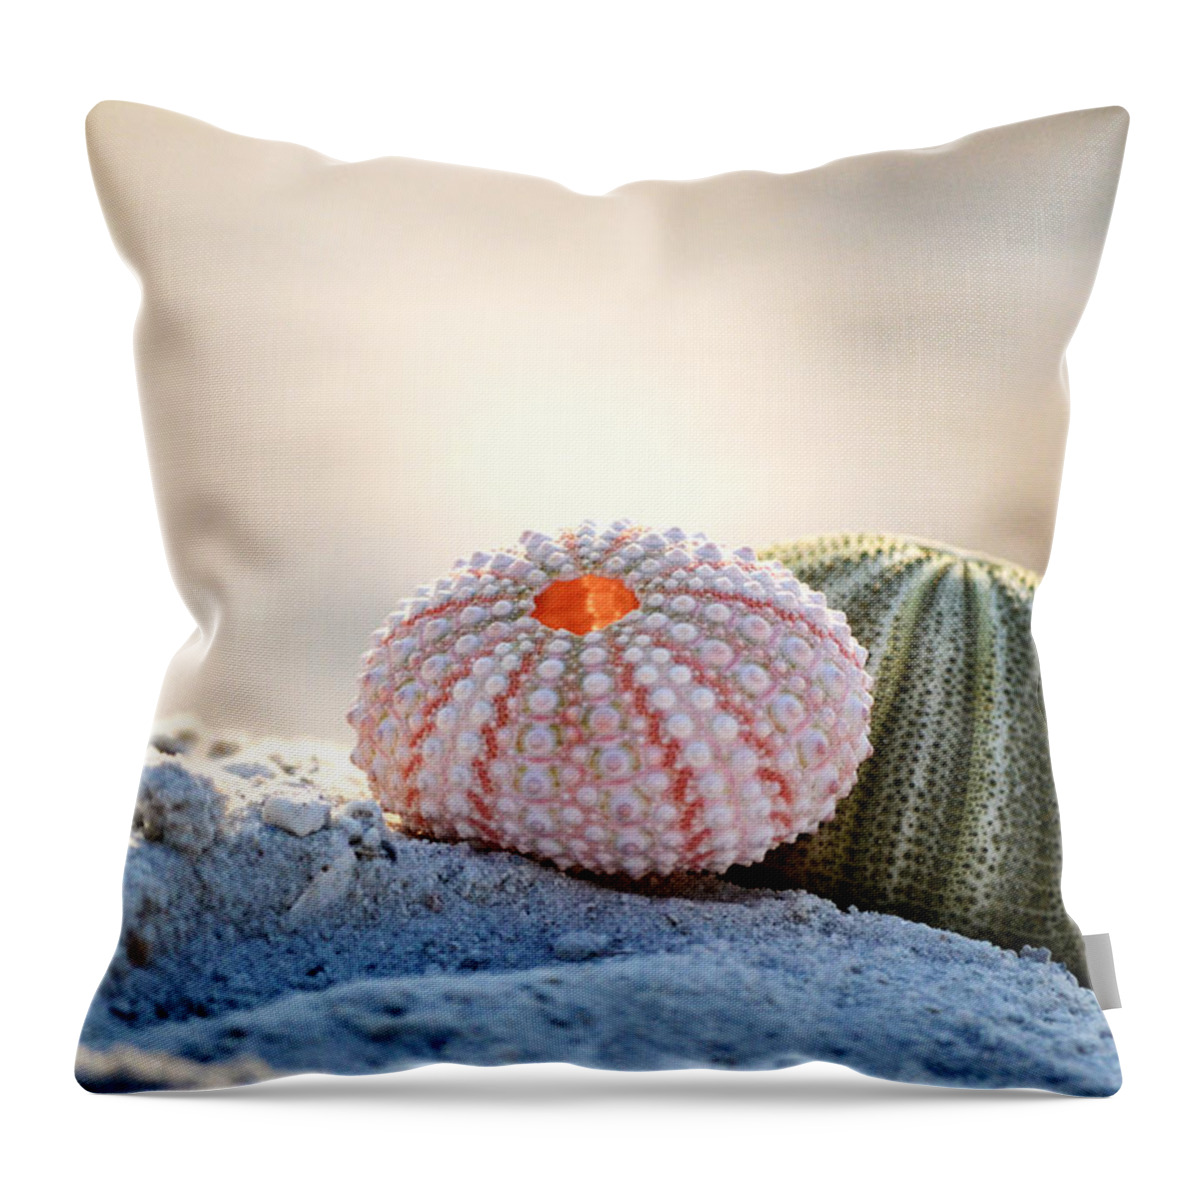 Urchin Throw Pillow featuring the photograph Gone Shelling by Melanie Moraga